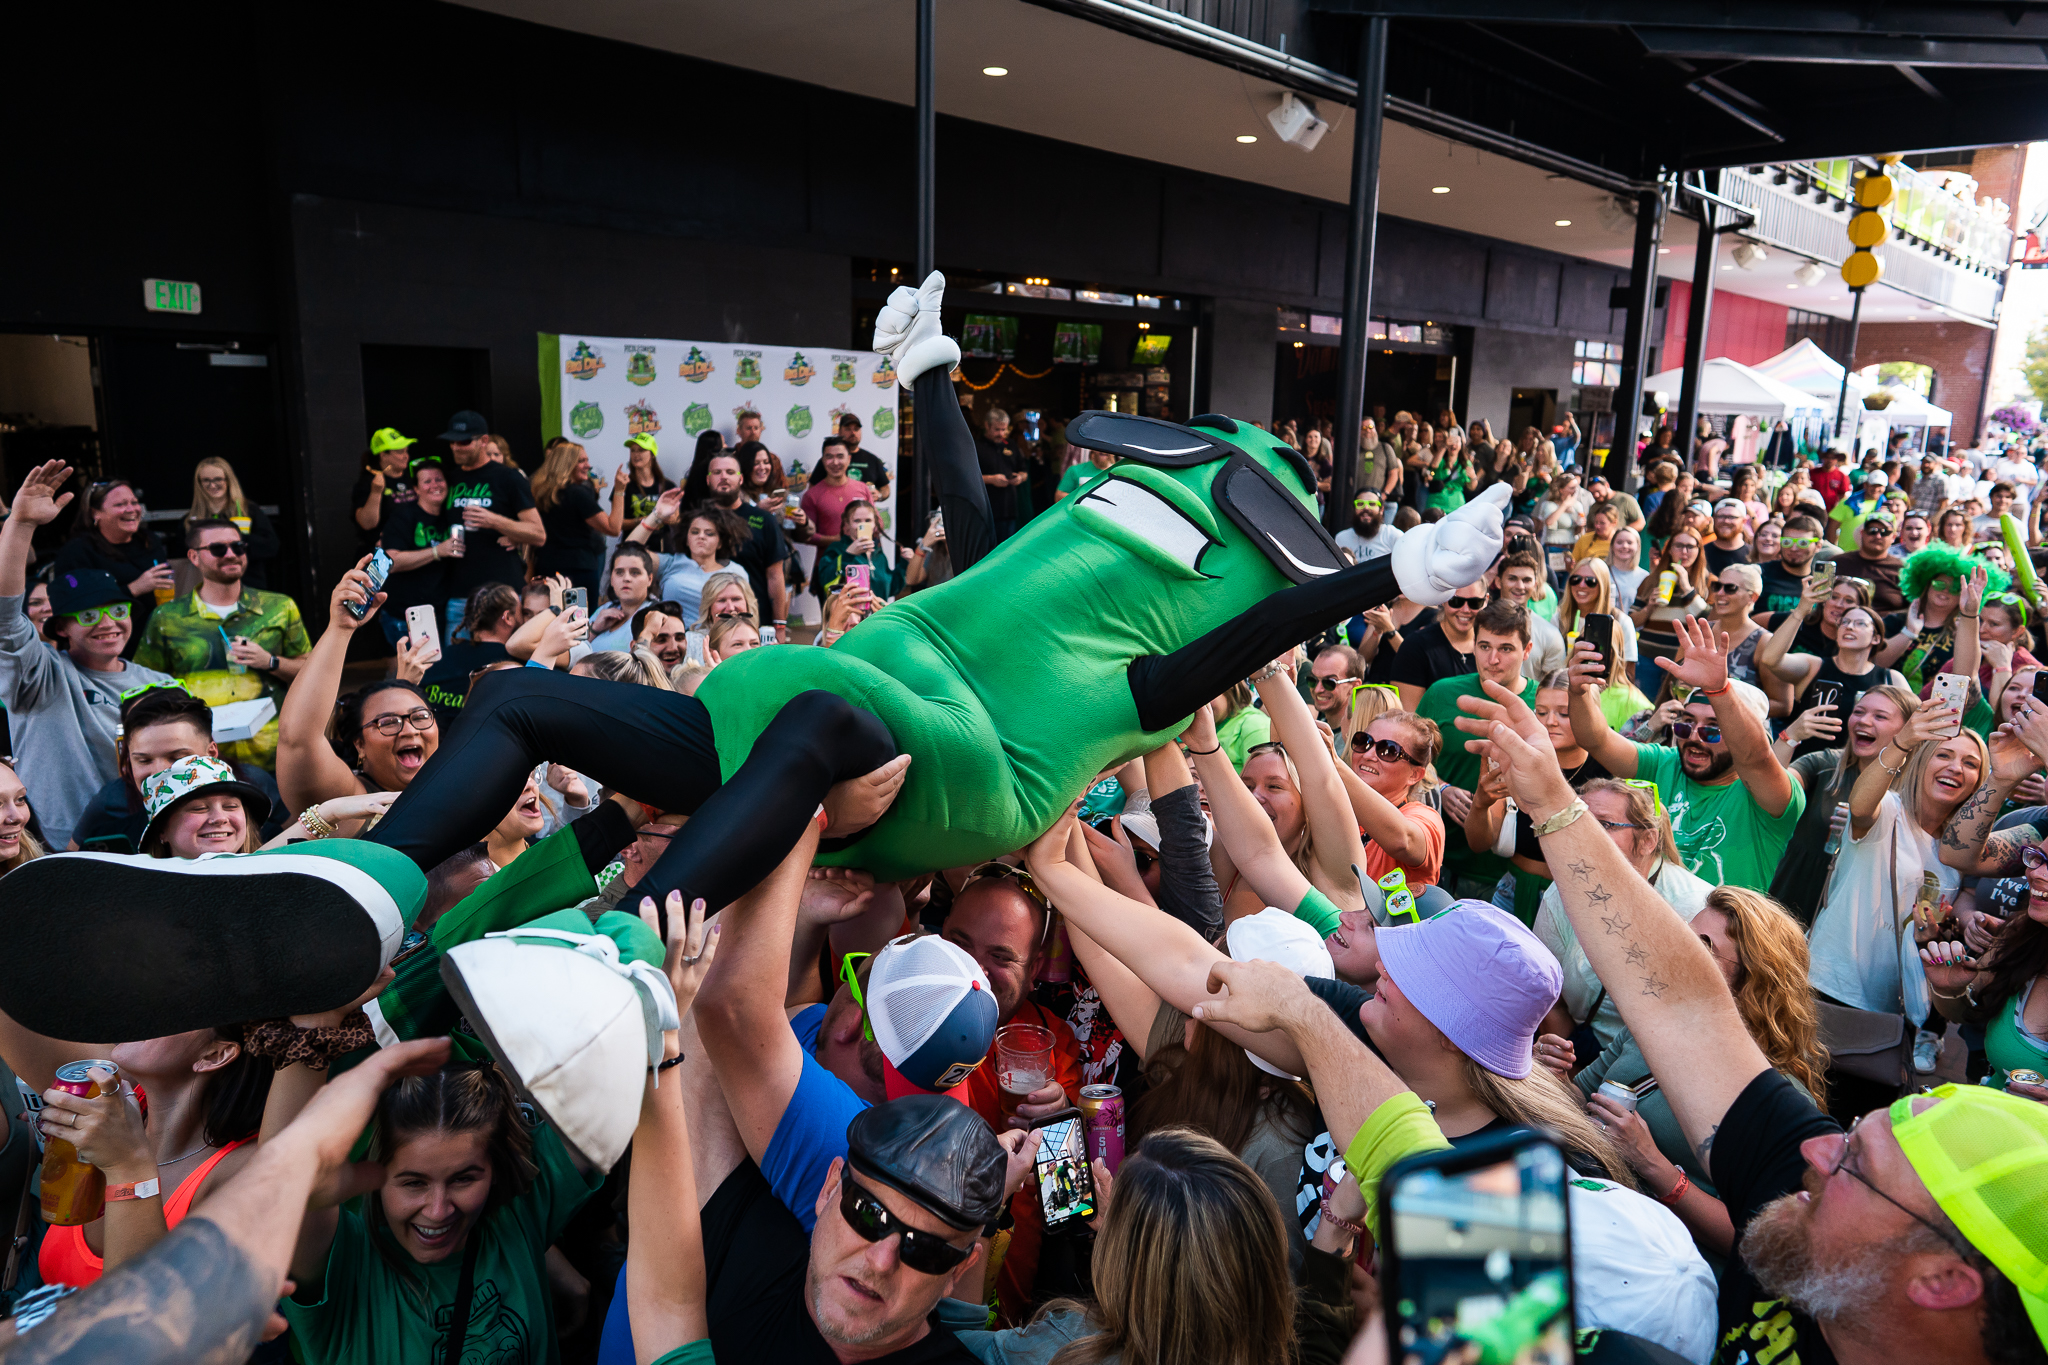 A person dressed as a pickle goes crowdsurfing